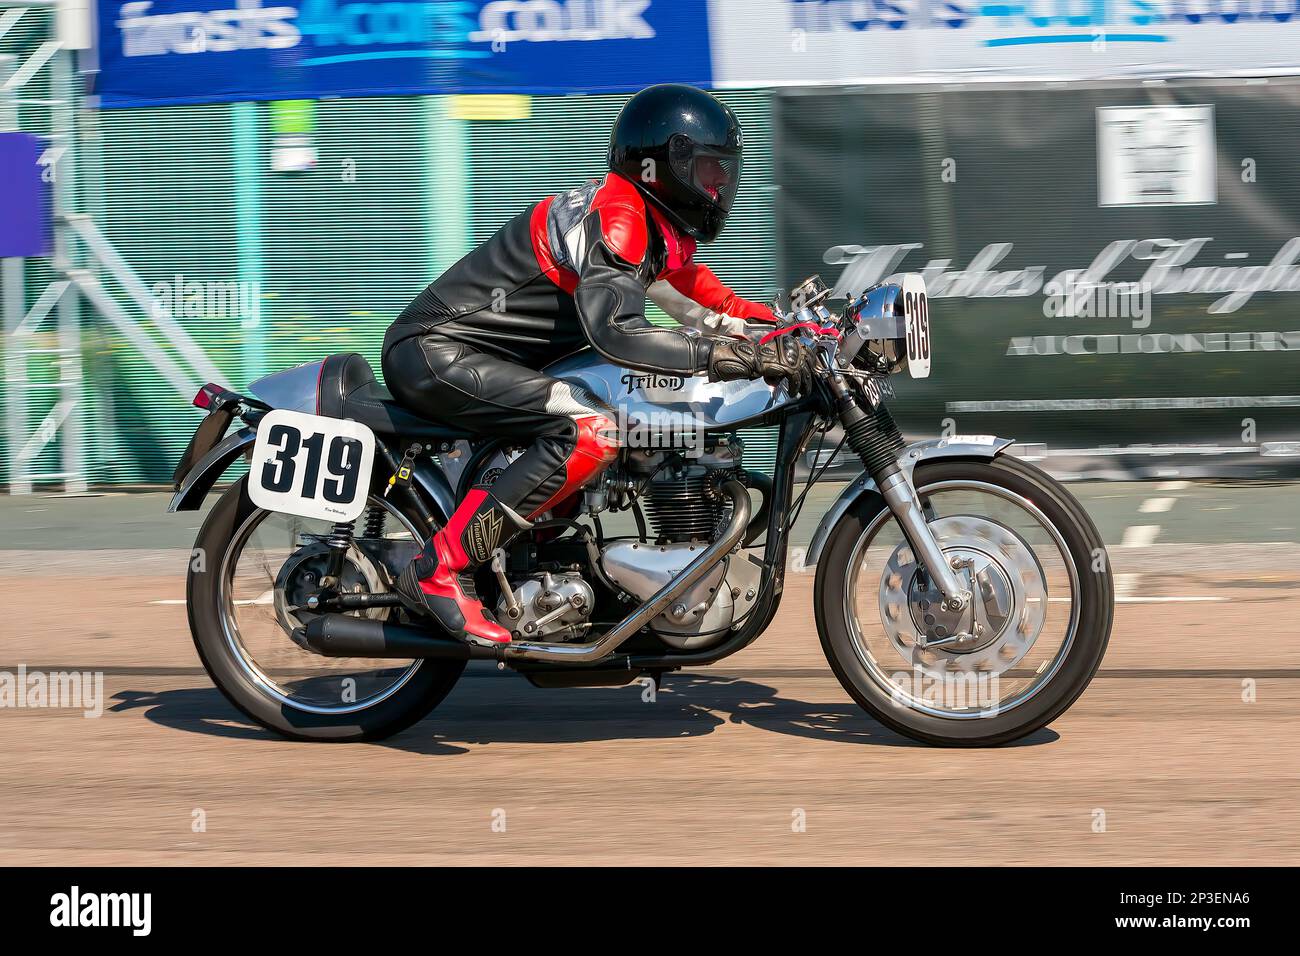 The event is currently run as a quarter mile sprint for both cars and motorcycles, held under the auspices of the Motor Sports Association. This image features Kim Wheatley riding a Triton. The event is organised by the Brighton and Hove Motor Club run along Madeira Drive, Brighton Sea Front, City of Brighton & Hove, UK. 1st September 2018 Stock Photo